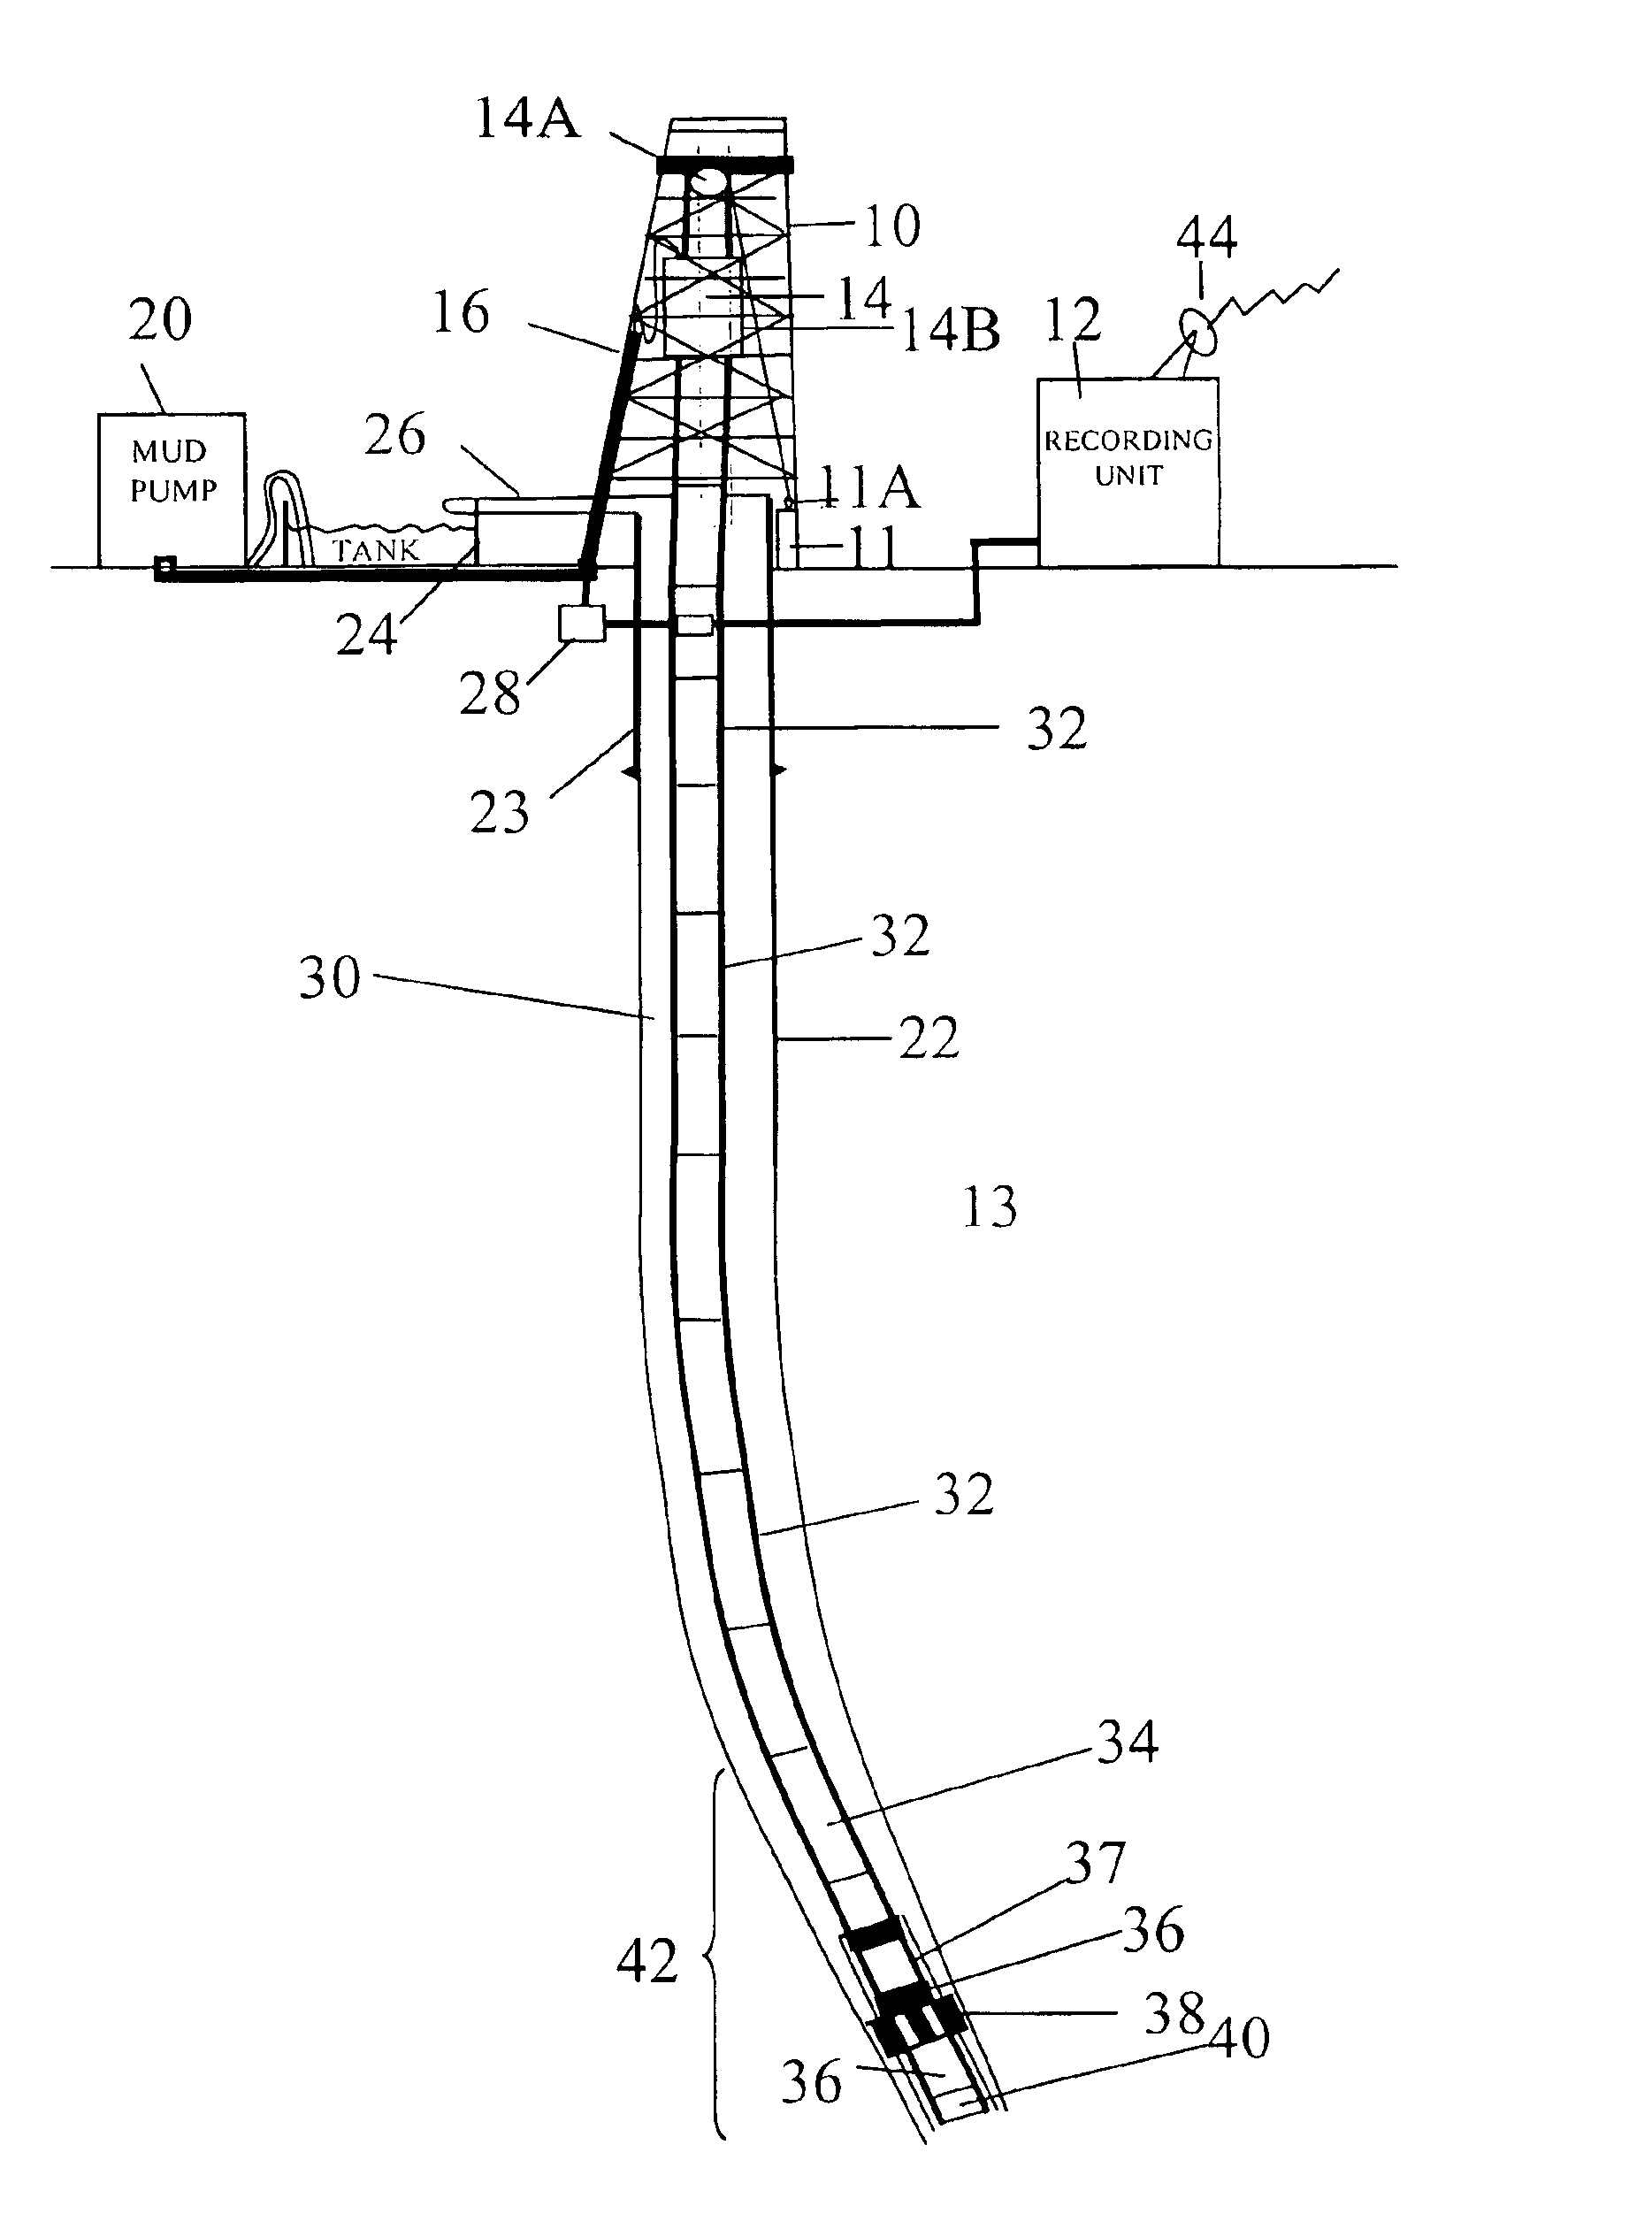 Method for attenuating conductive sonde mandrel effects in an electromagnetic induction well logging apparatus